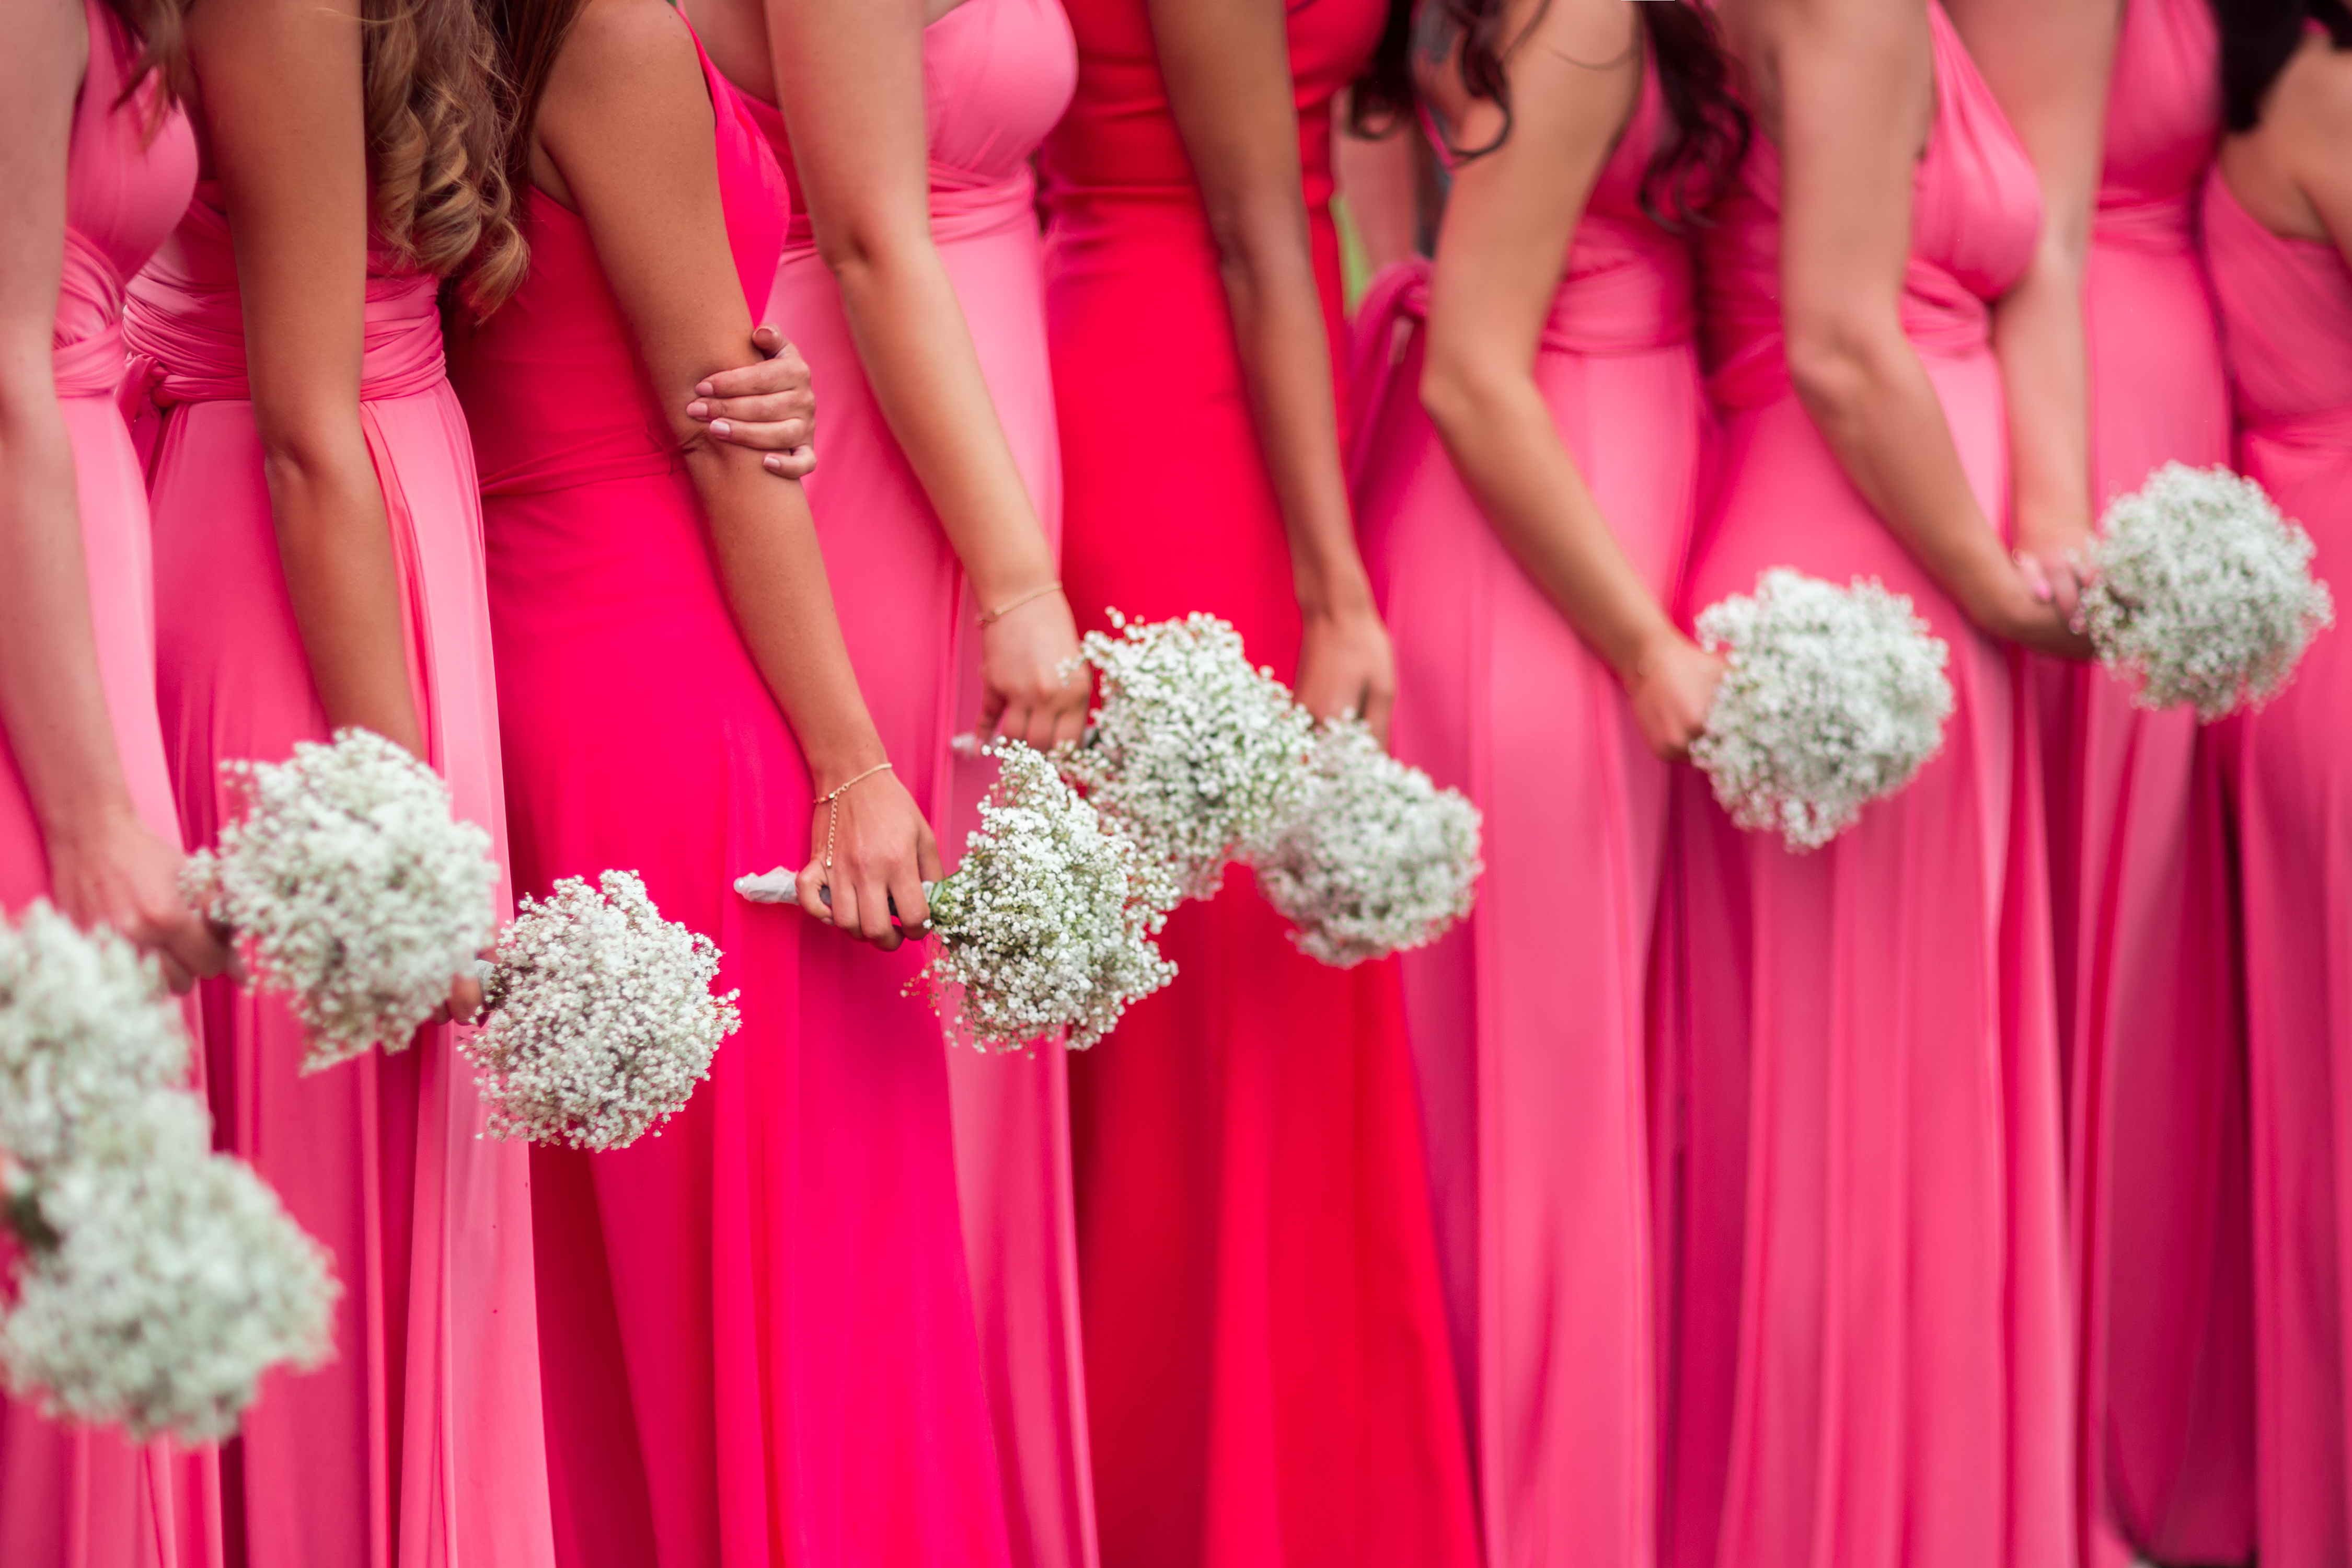 A row of bridesmaids in pink, each carrying a flower bouquet | Source: Shutterstock